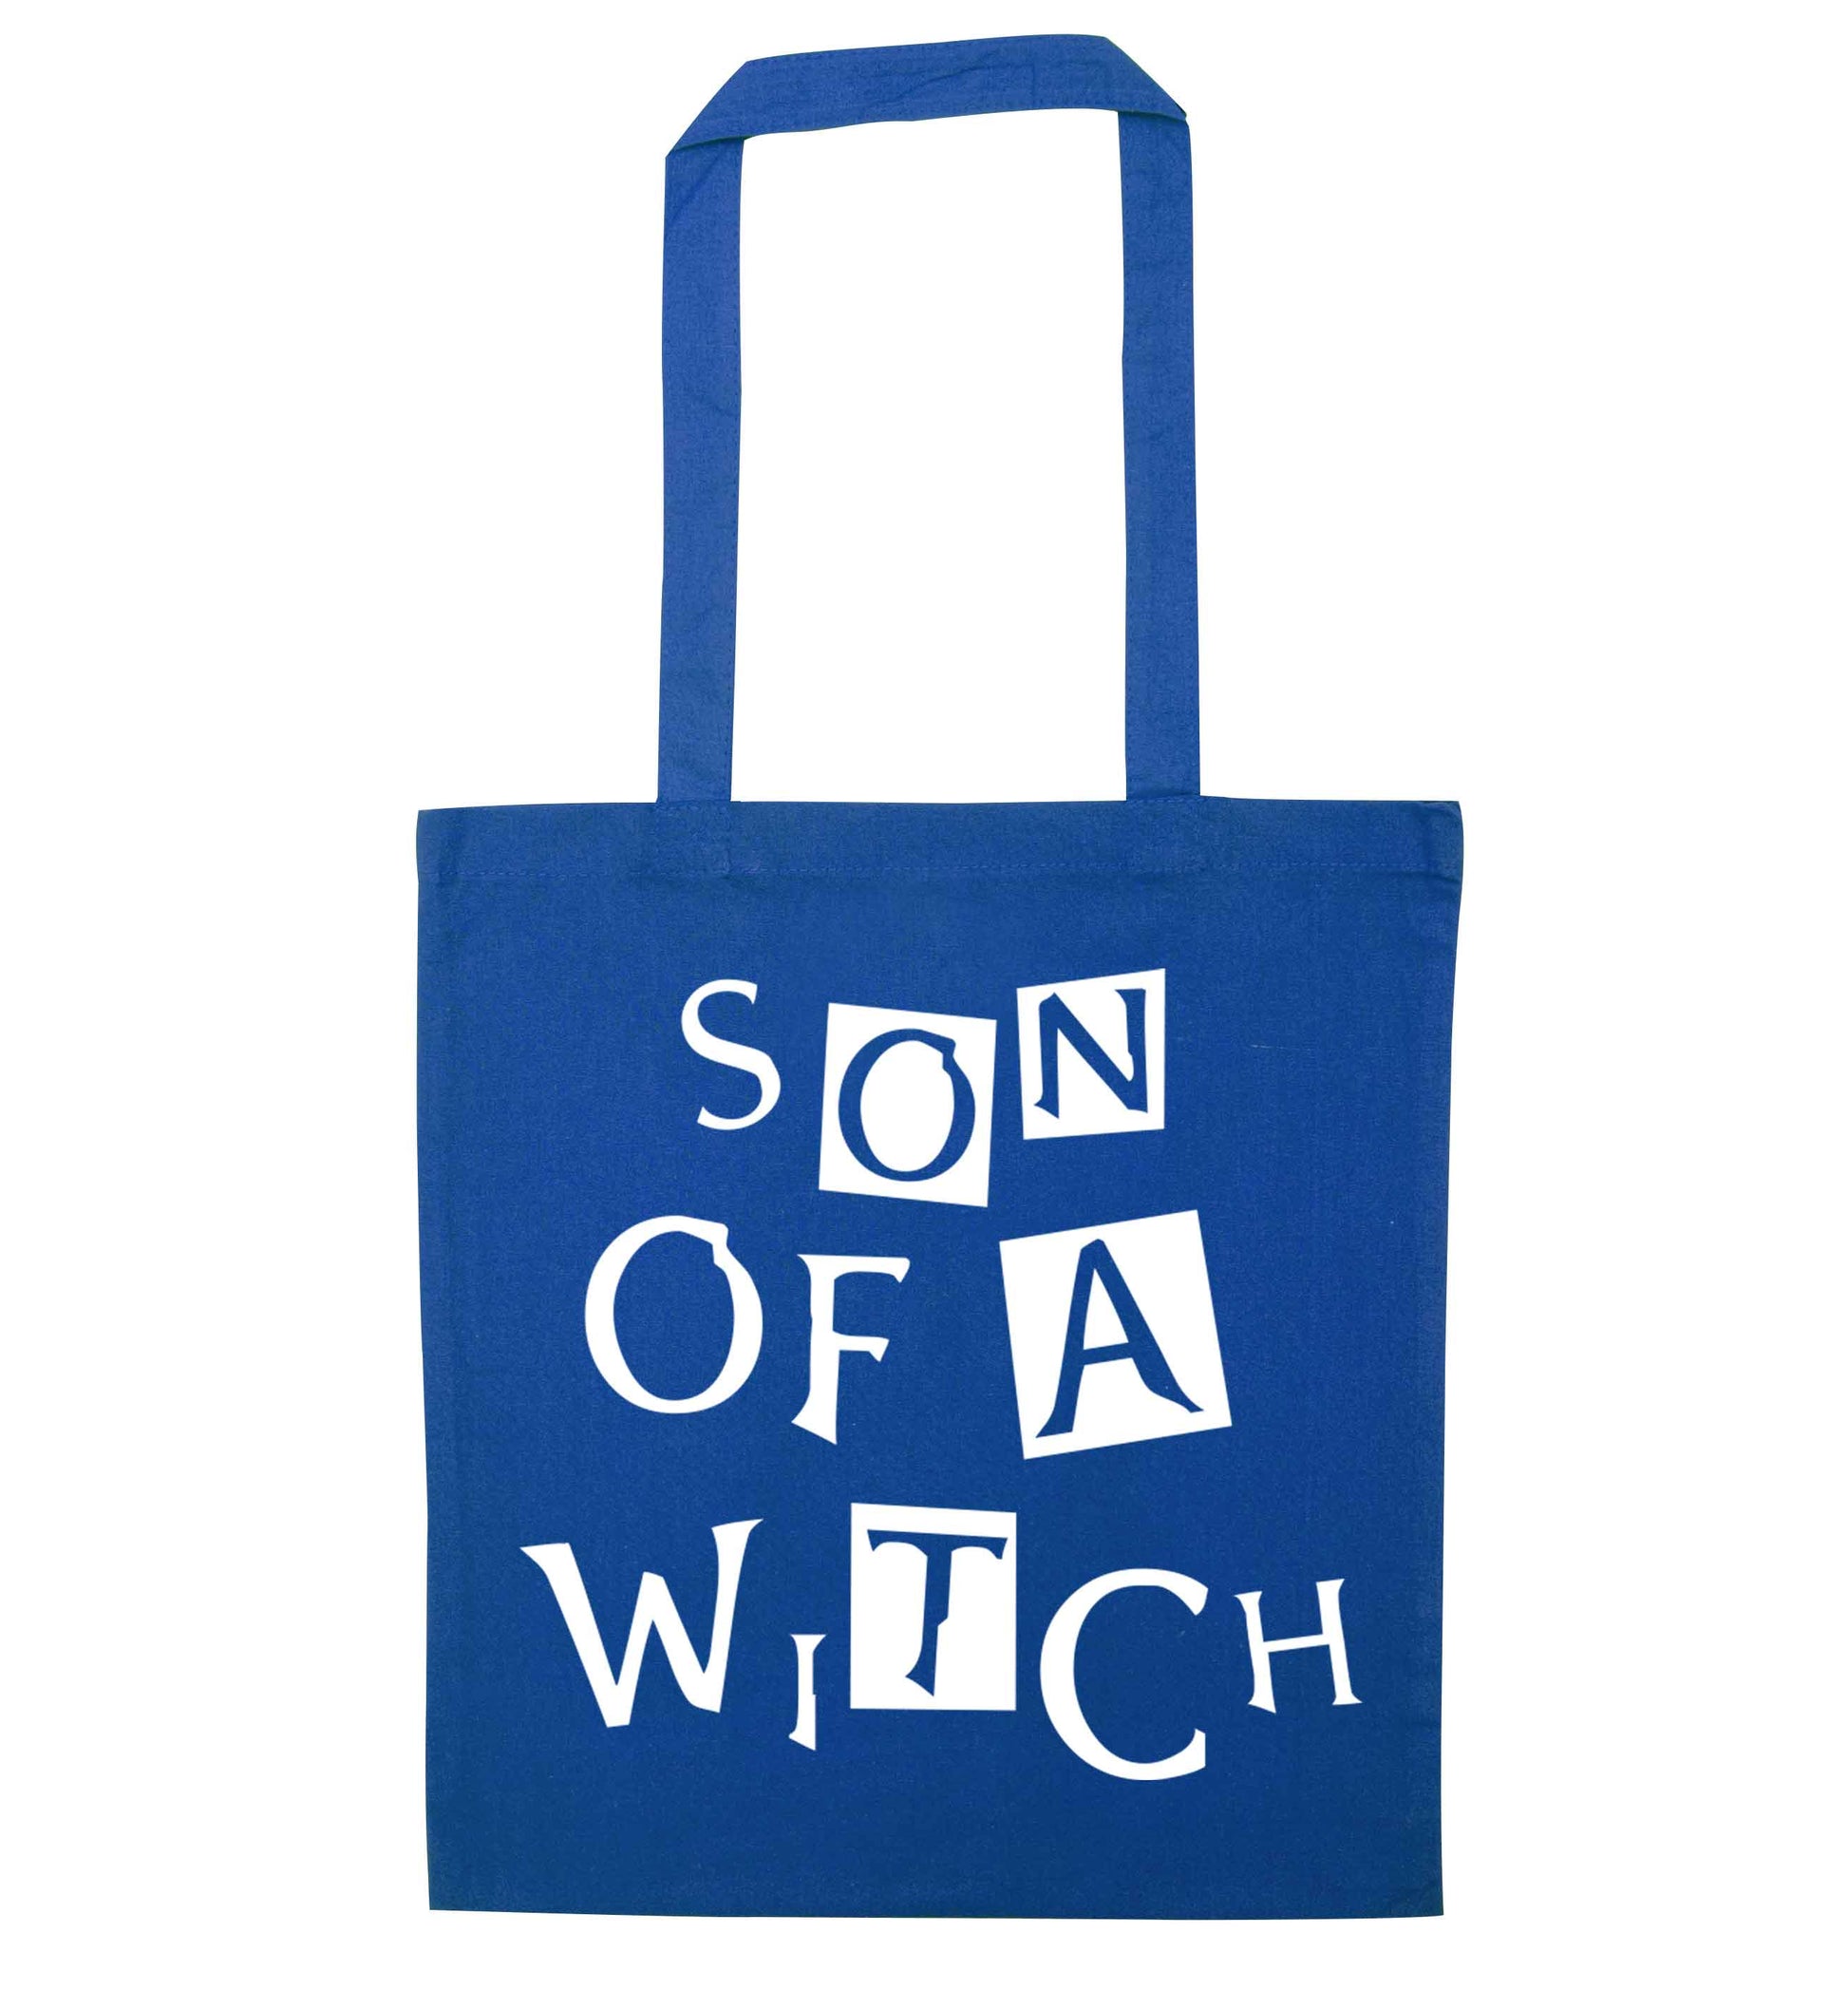 Son of a witch blue tote bag